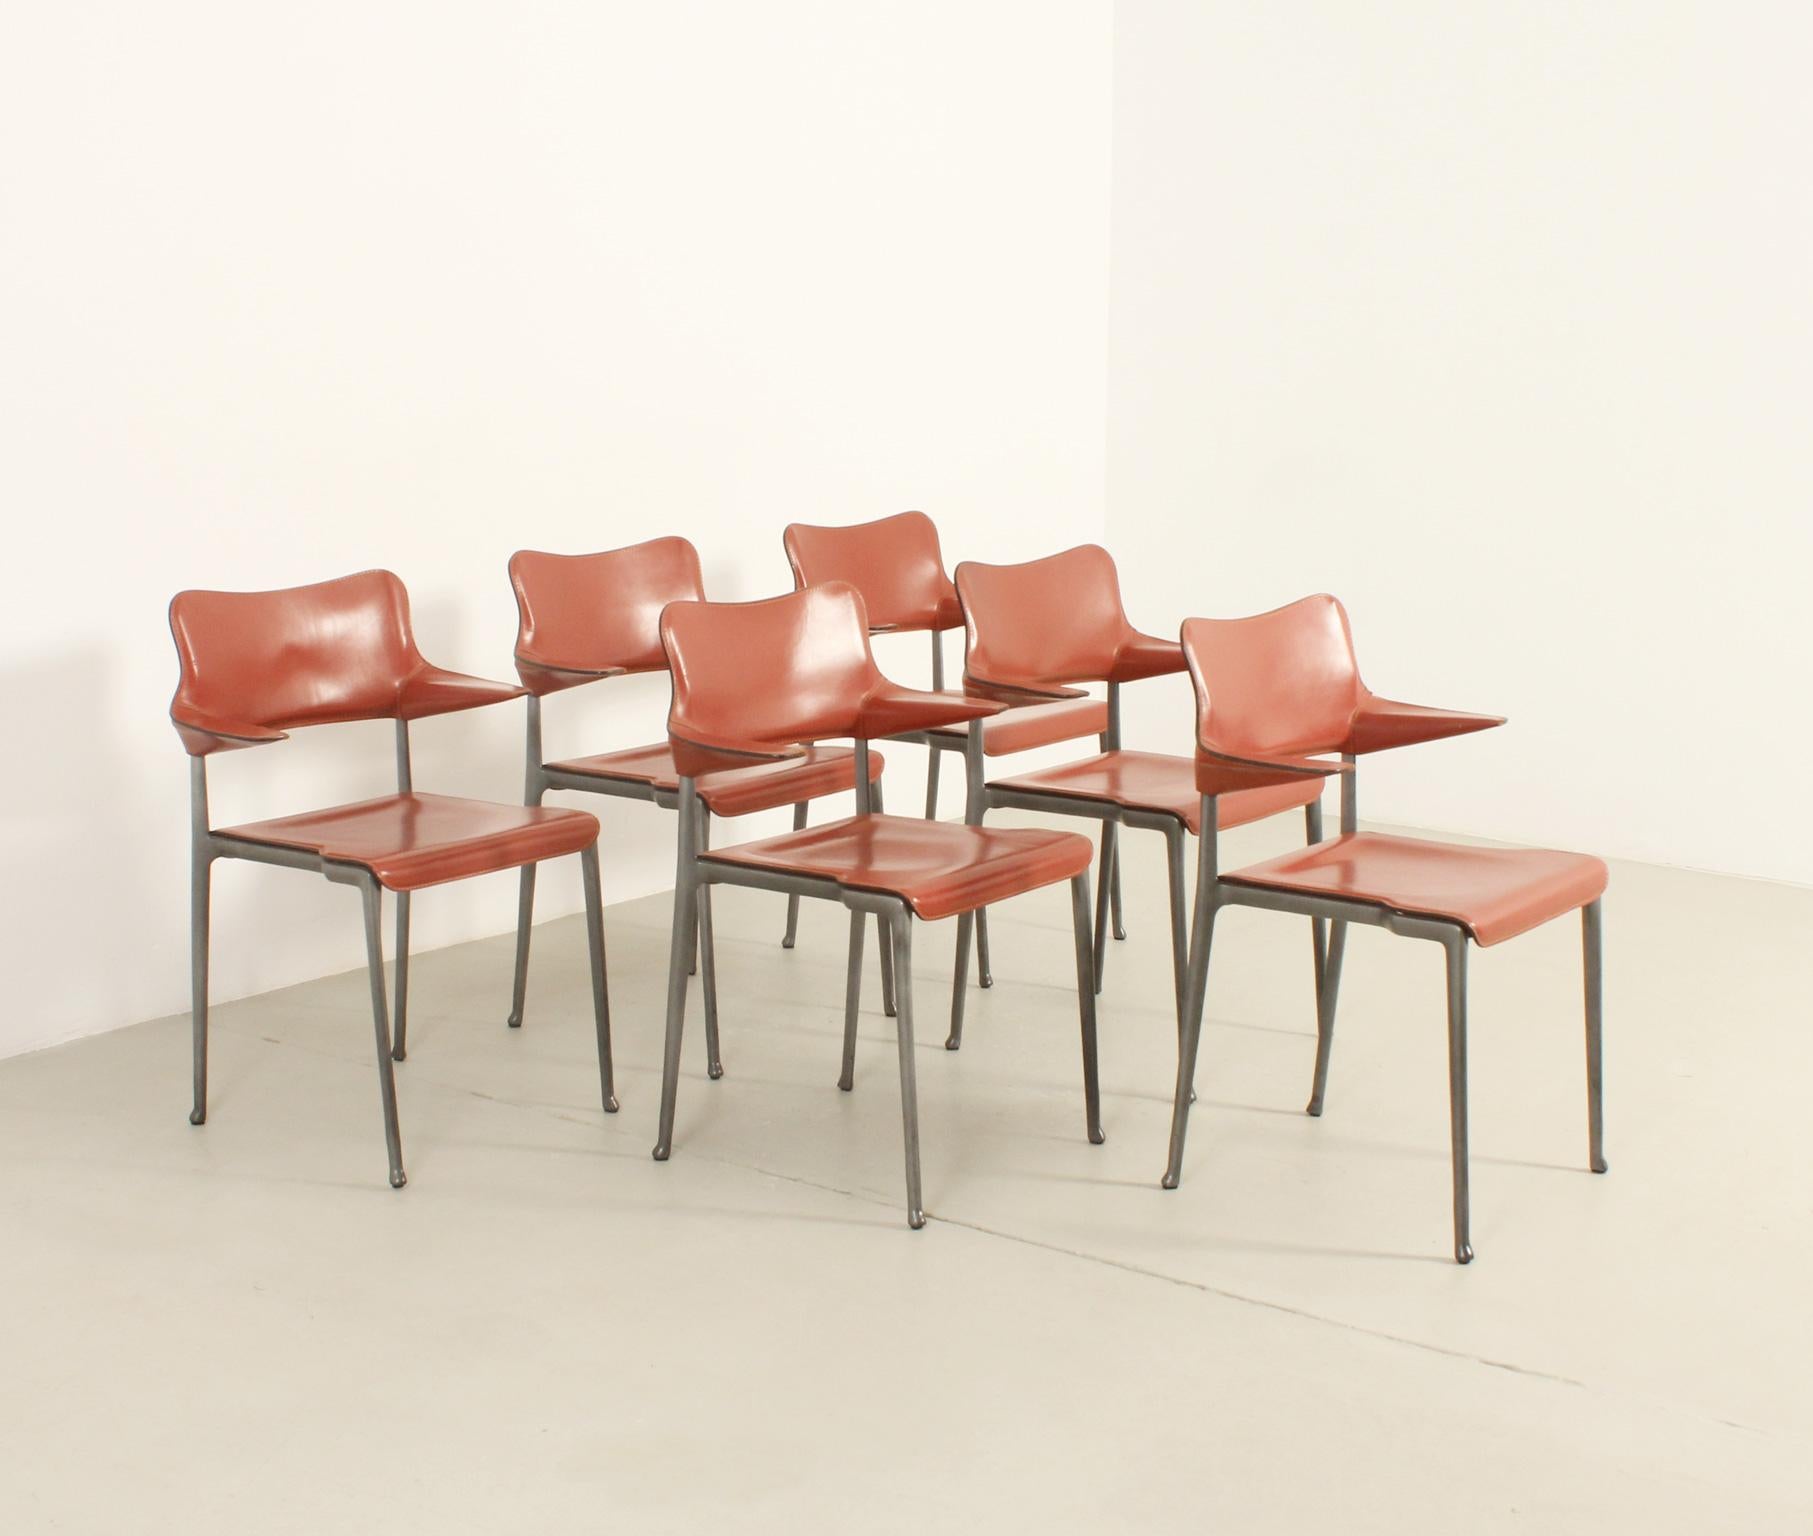 Late 20th Century Set of Six Kumo Chairs by Toshiyuki Kita for Casas, Spain, 1989 For Sale